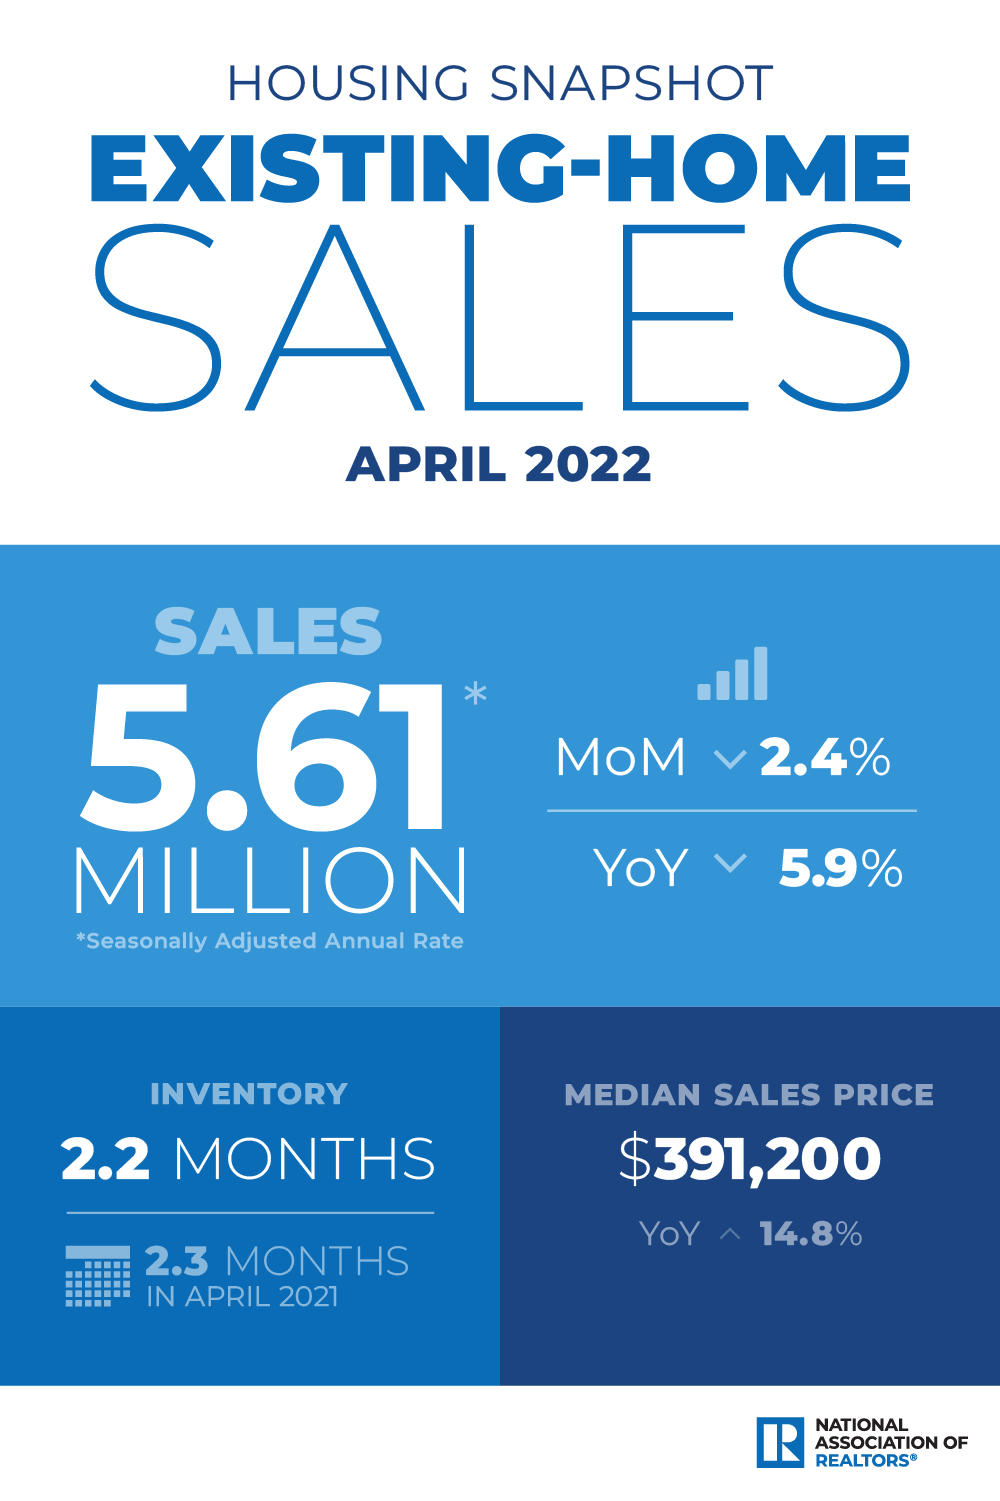 A graphic of existing-home sales data from April 2022.